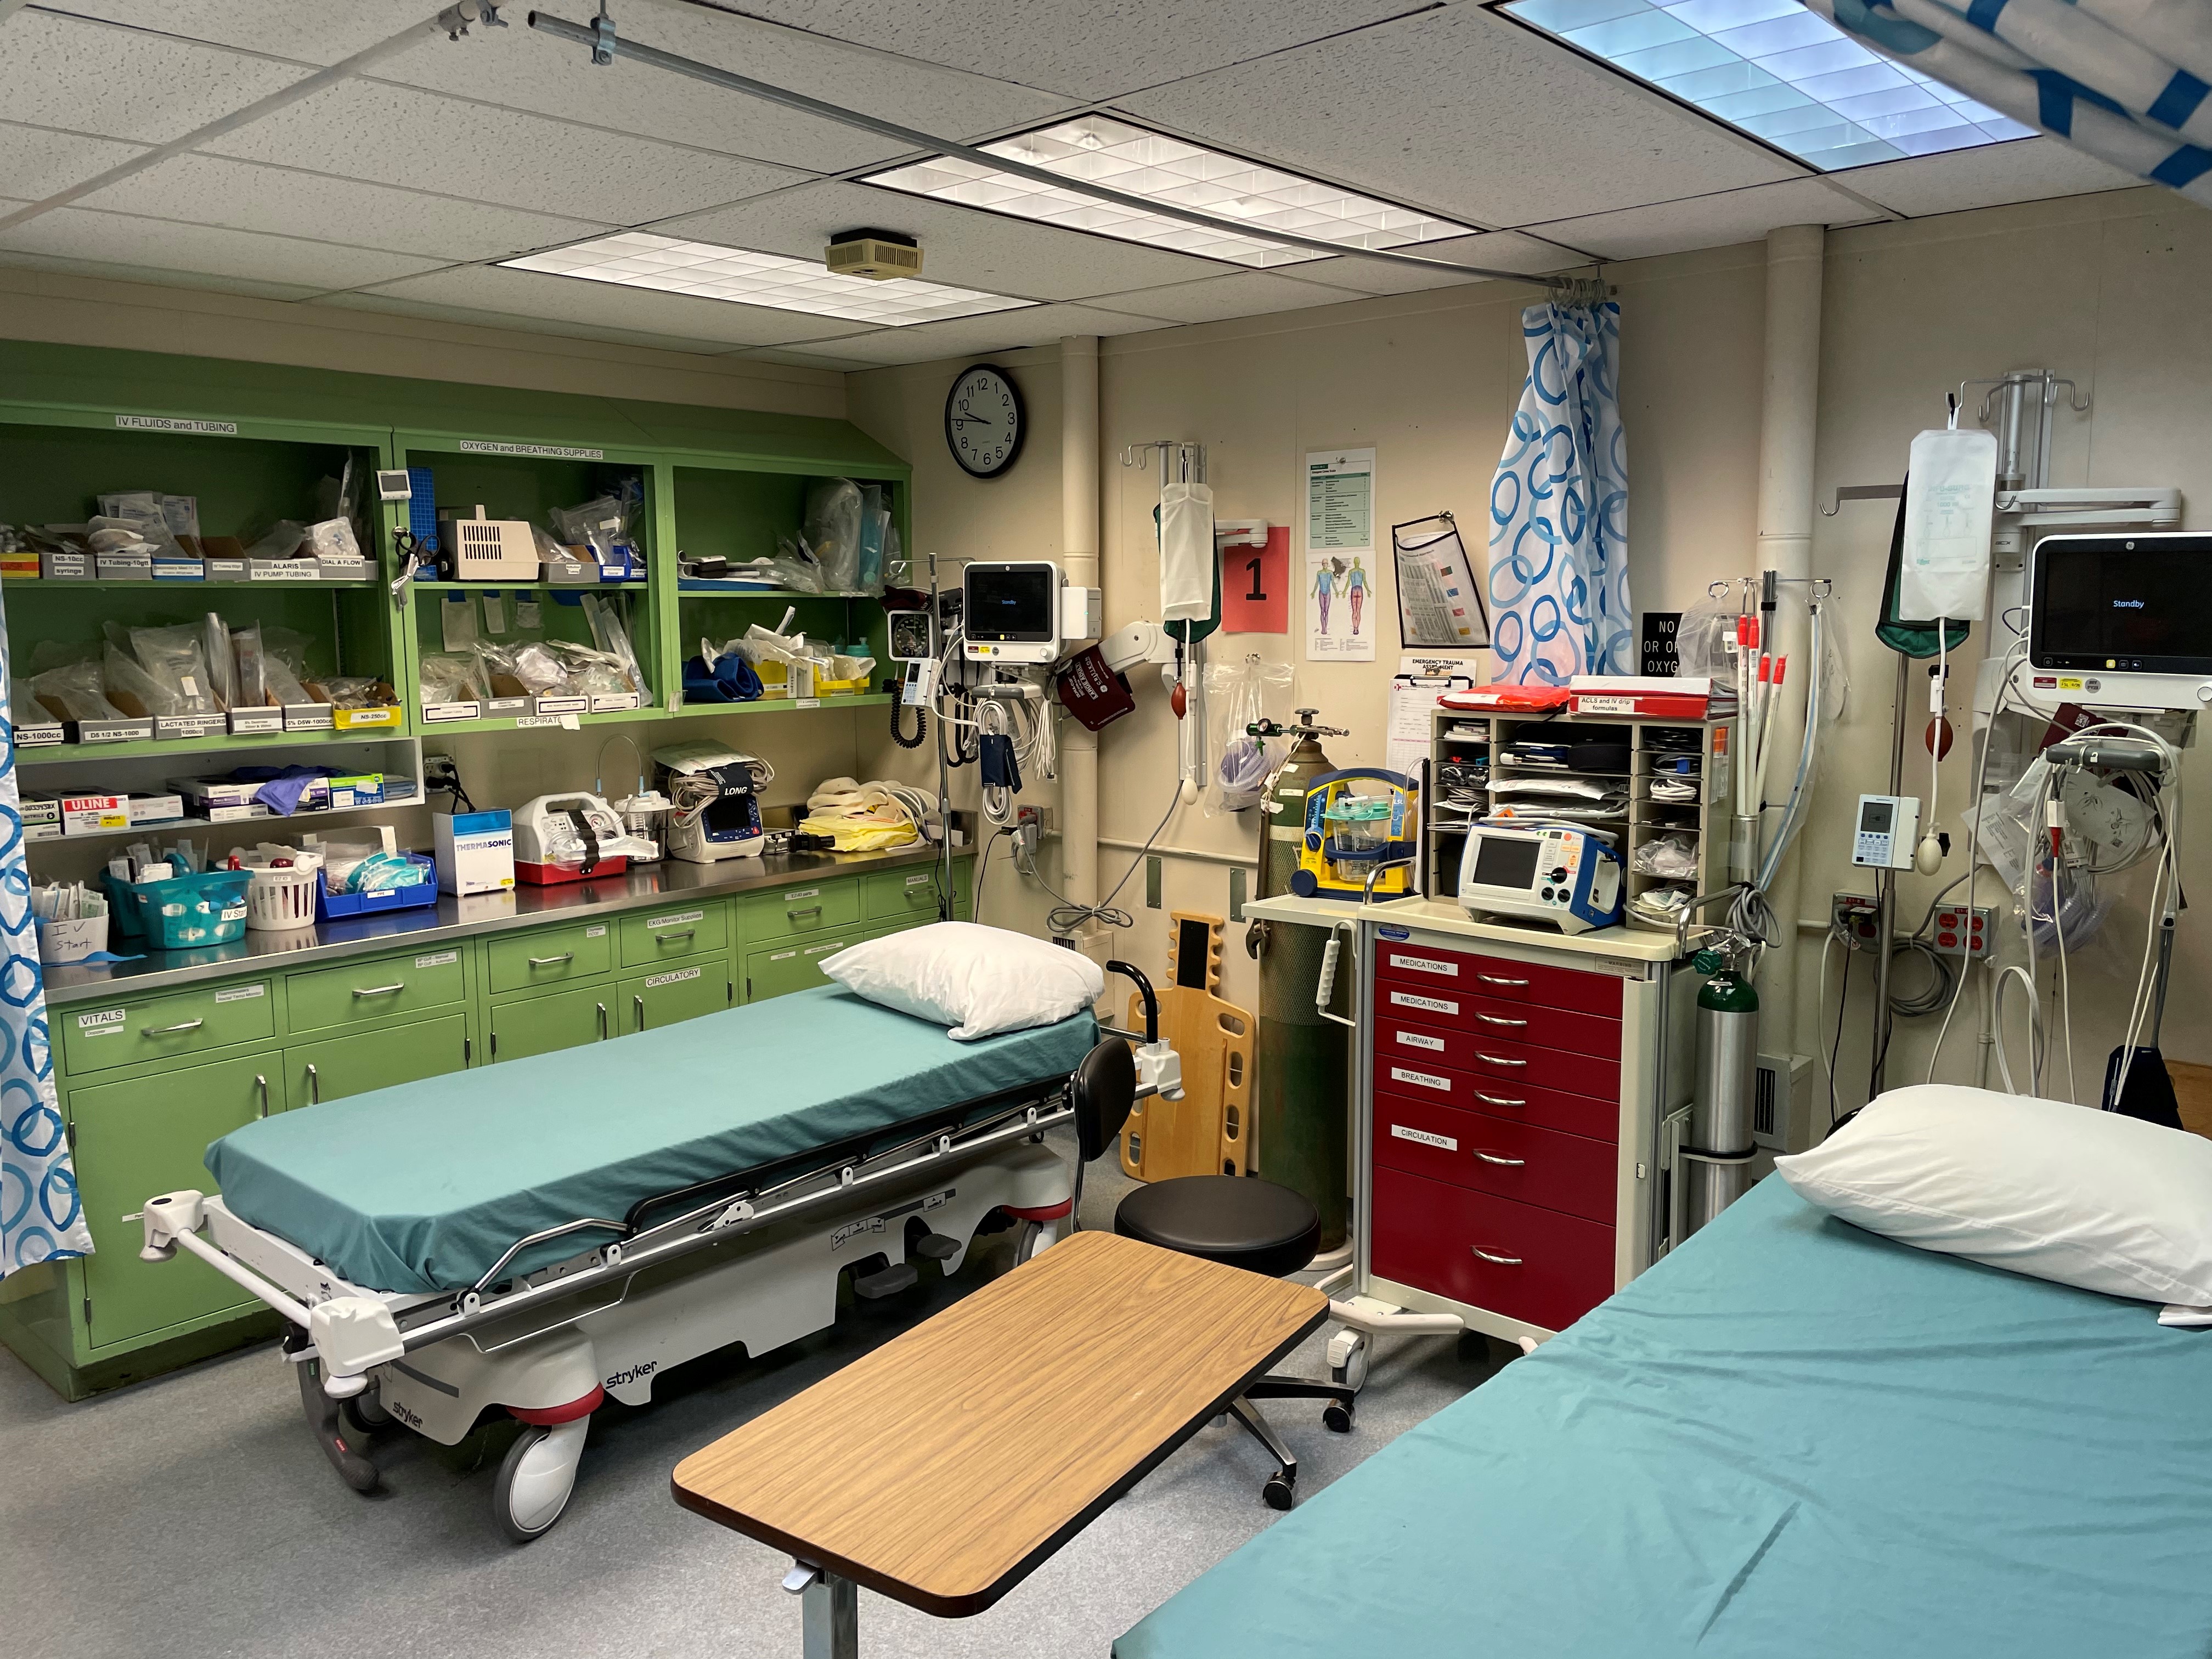 The clinic at McMurdo station has X-ray and lab capabilities as well as a trauma bay with ventilators, defibrillators, and IV pumps.